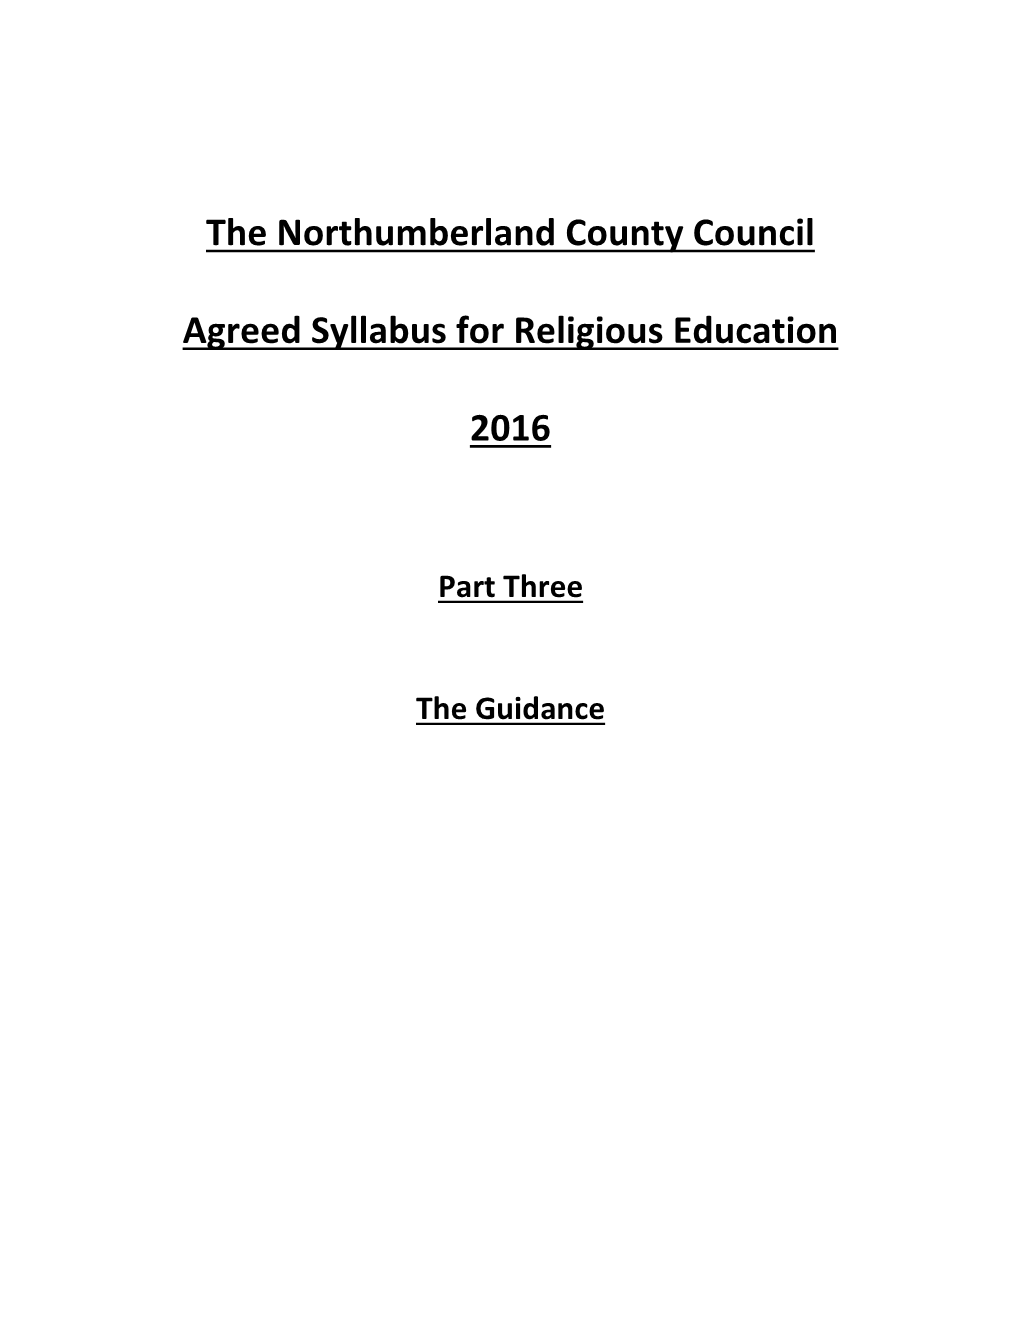 The Northumberland County Council Agreed Syllabus for Religious Education 2016